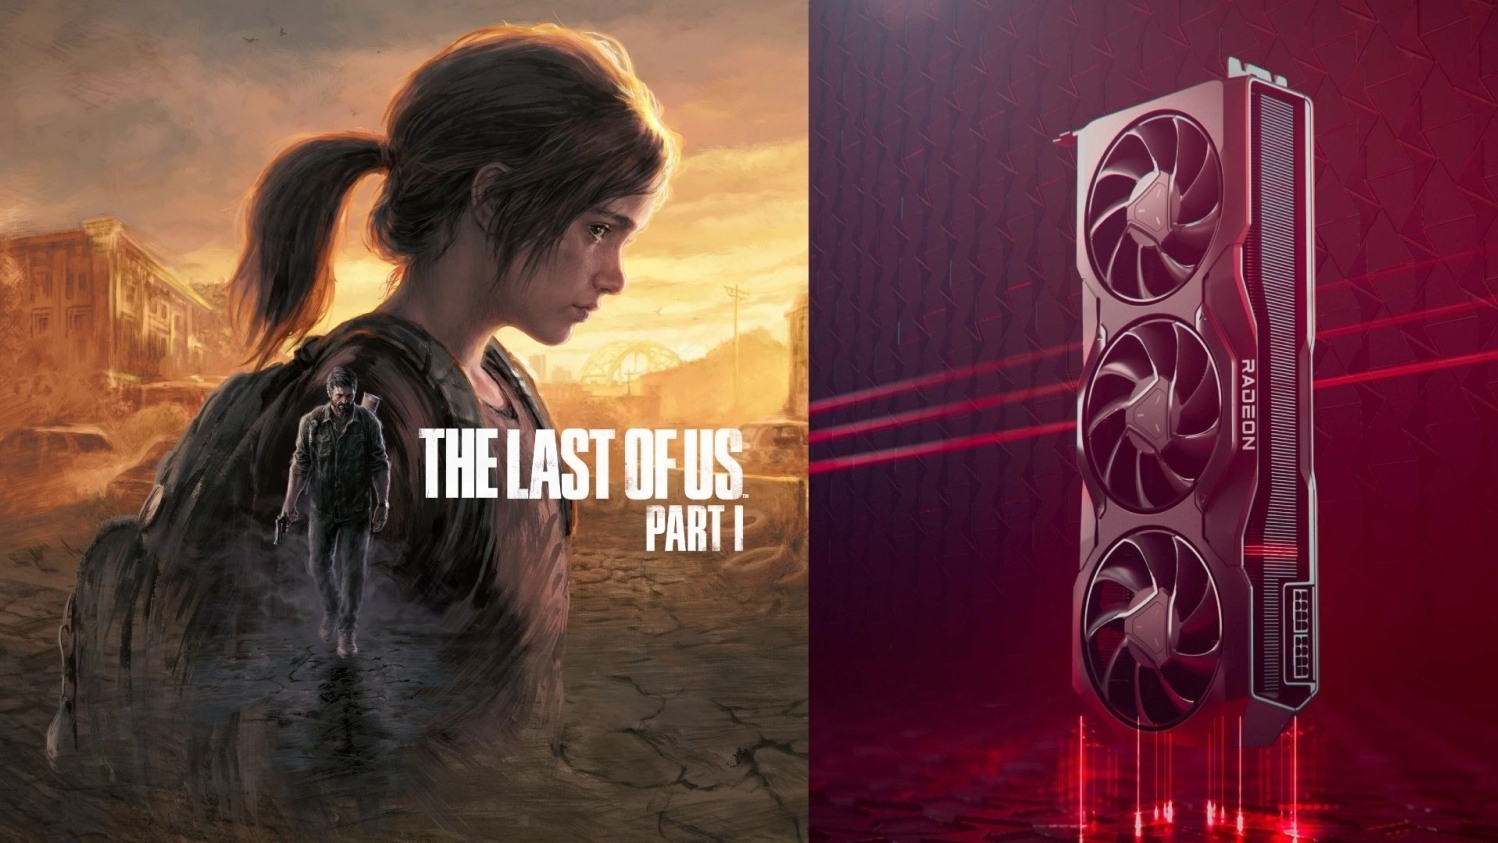 AMD's Optimized Radeon GPU Driver For The Last of Us Is Now Available As The  Game Gets Demolished For Being A Poor PC Port